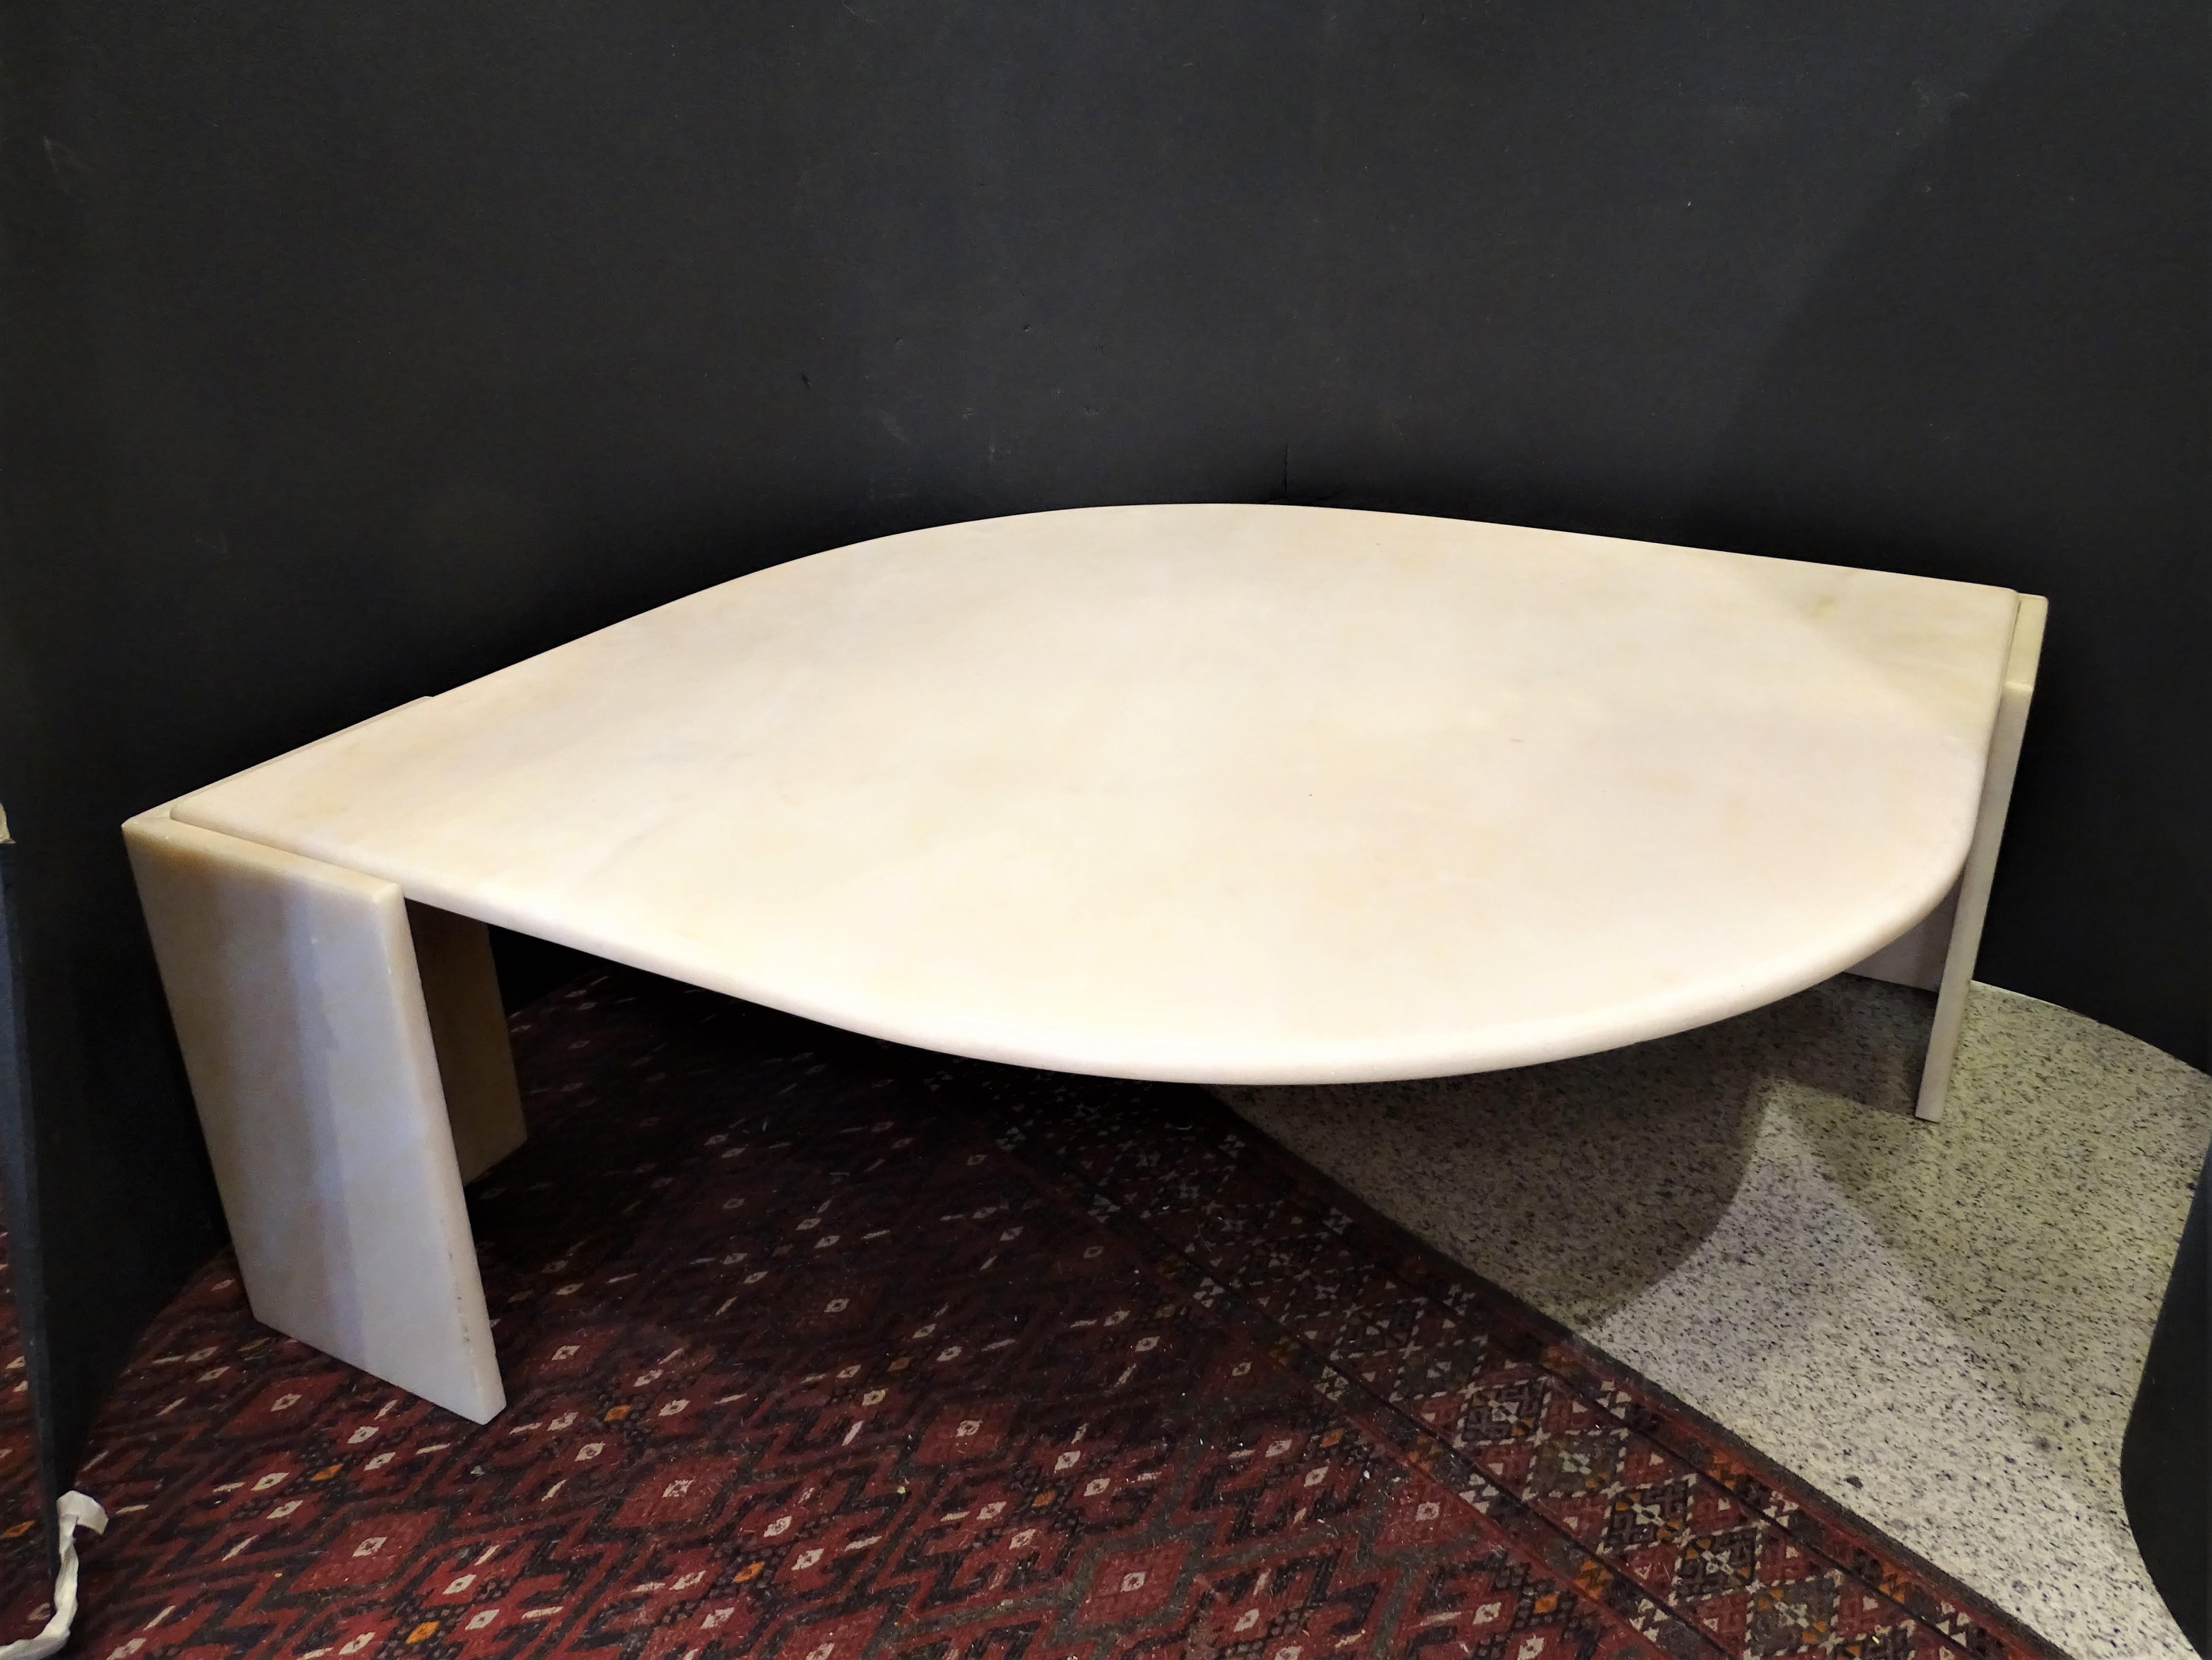 Amazing coffee table, French design, by Roche Bobois 1970s. Made with travertine marble.
It has a big central piece in  tear -shiped and Two pieces at the ends supporting it 

Midcentury design known as 